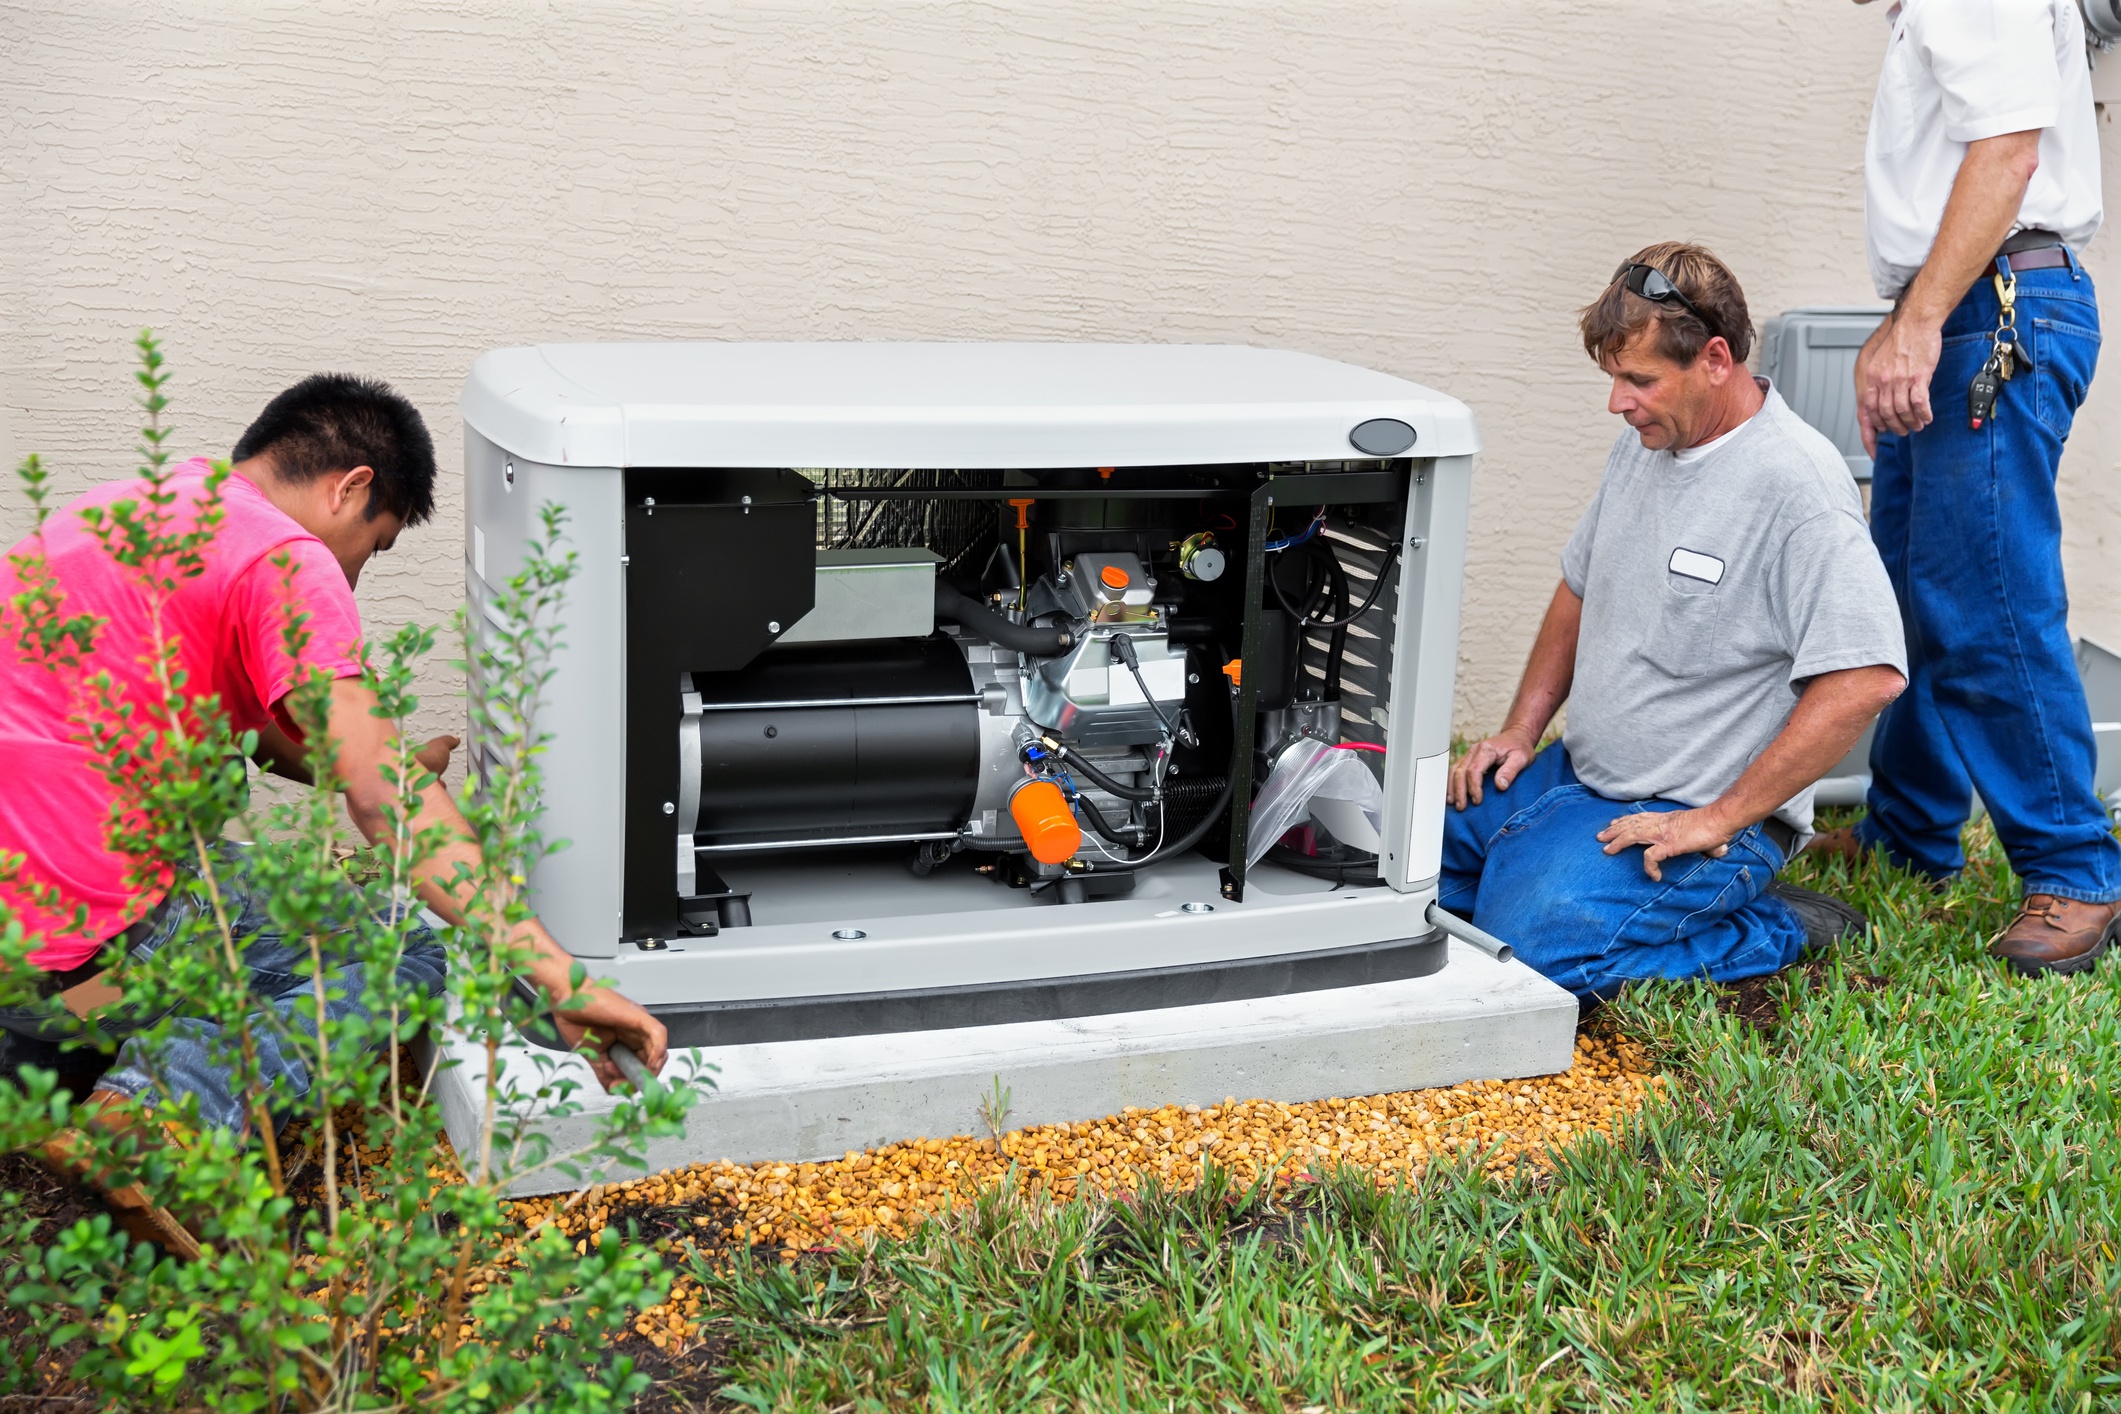 A man in a pink shirt and an older man in a gray shirt are on either side of a generator in a gray covering